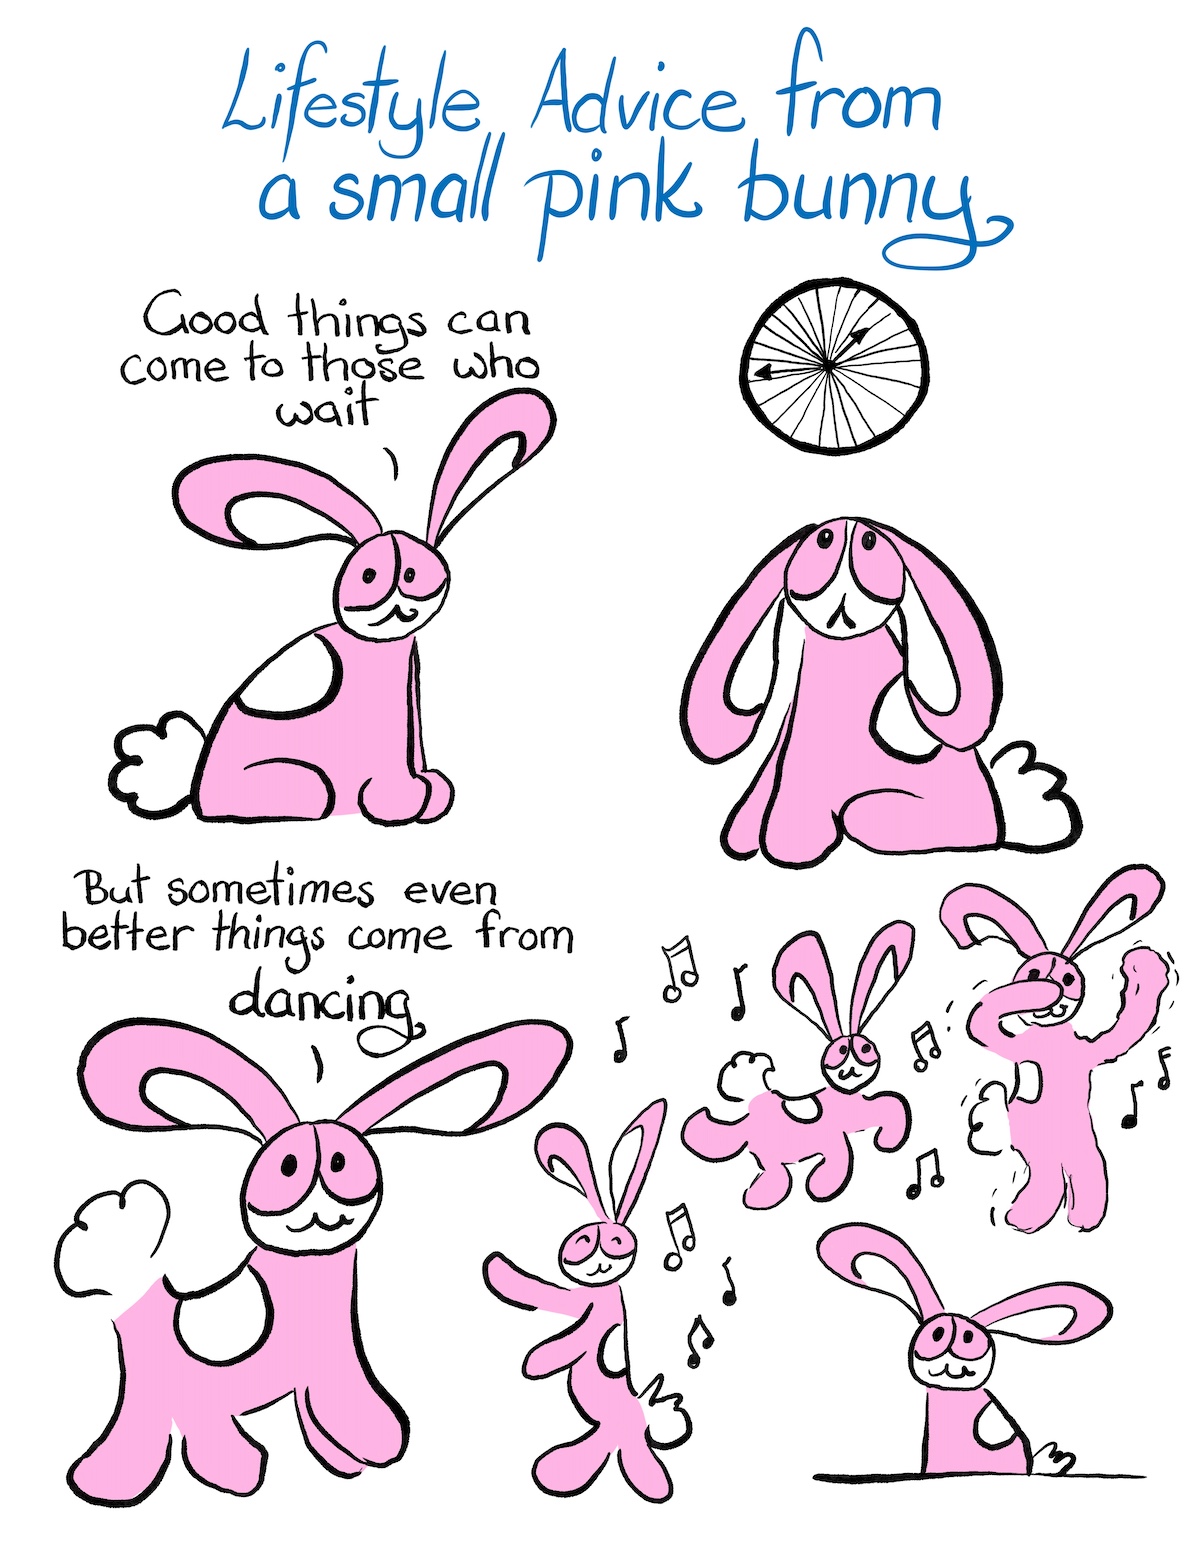 Comic Script Lifestyle Advice from a small pink bunny. Bunson Hoppydew: Good things come to those who wait. Bunson looks up at big clock. Bunson: But sometimes even better things come from dancing. Bunson dances and prances around to music and then he sits down happily, staring out at us.